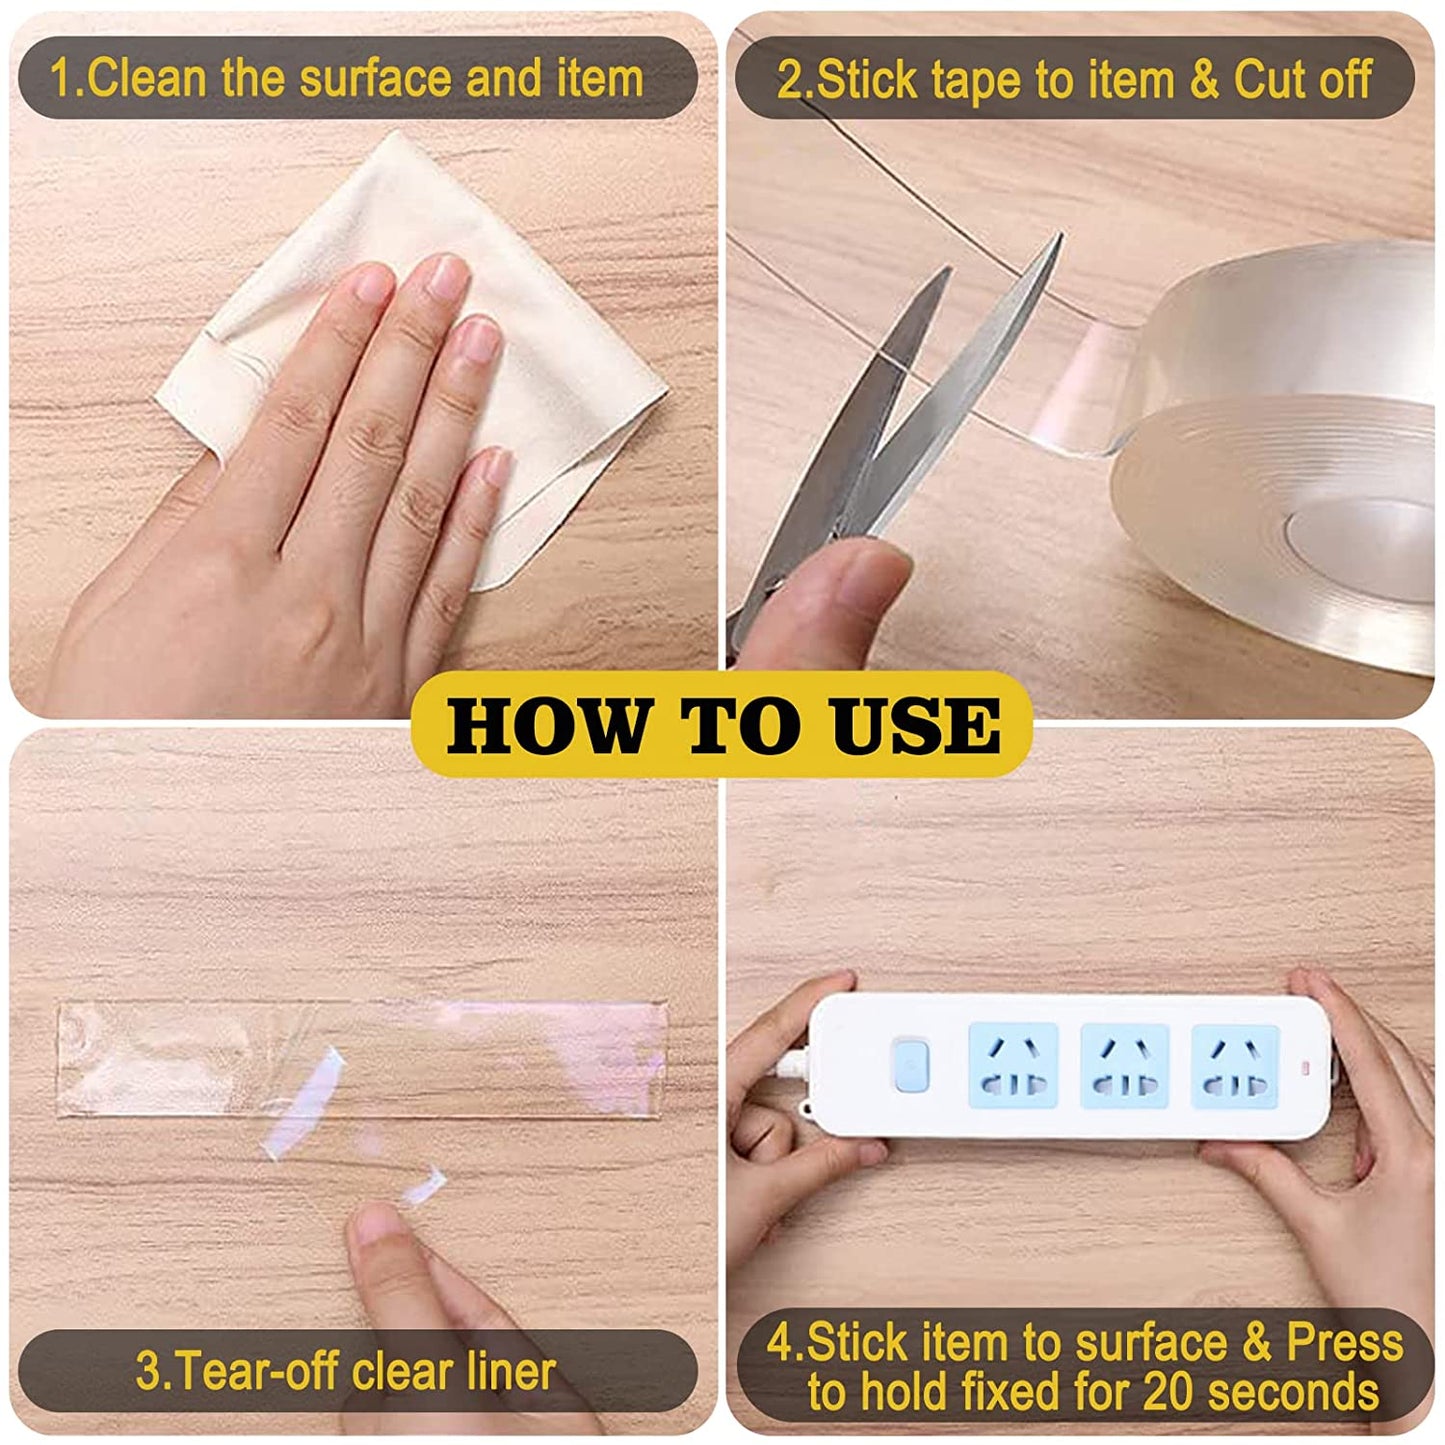 BEST DOUBLE SIDED TAPE. Ft Yoobtape. How to use a double sided tape  properly. #brahacks 